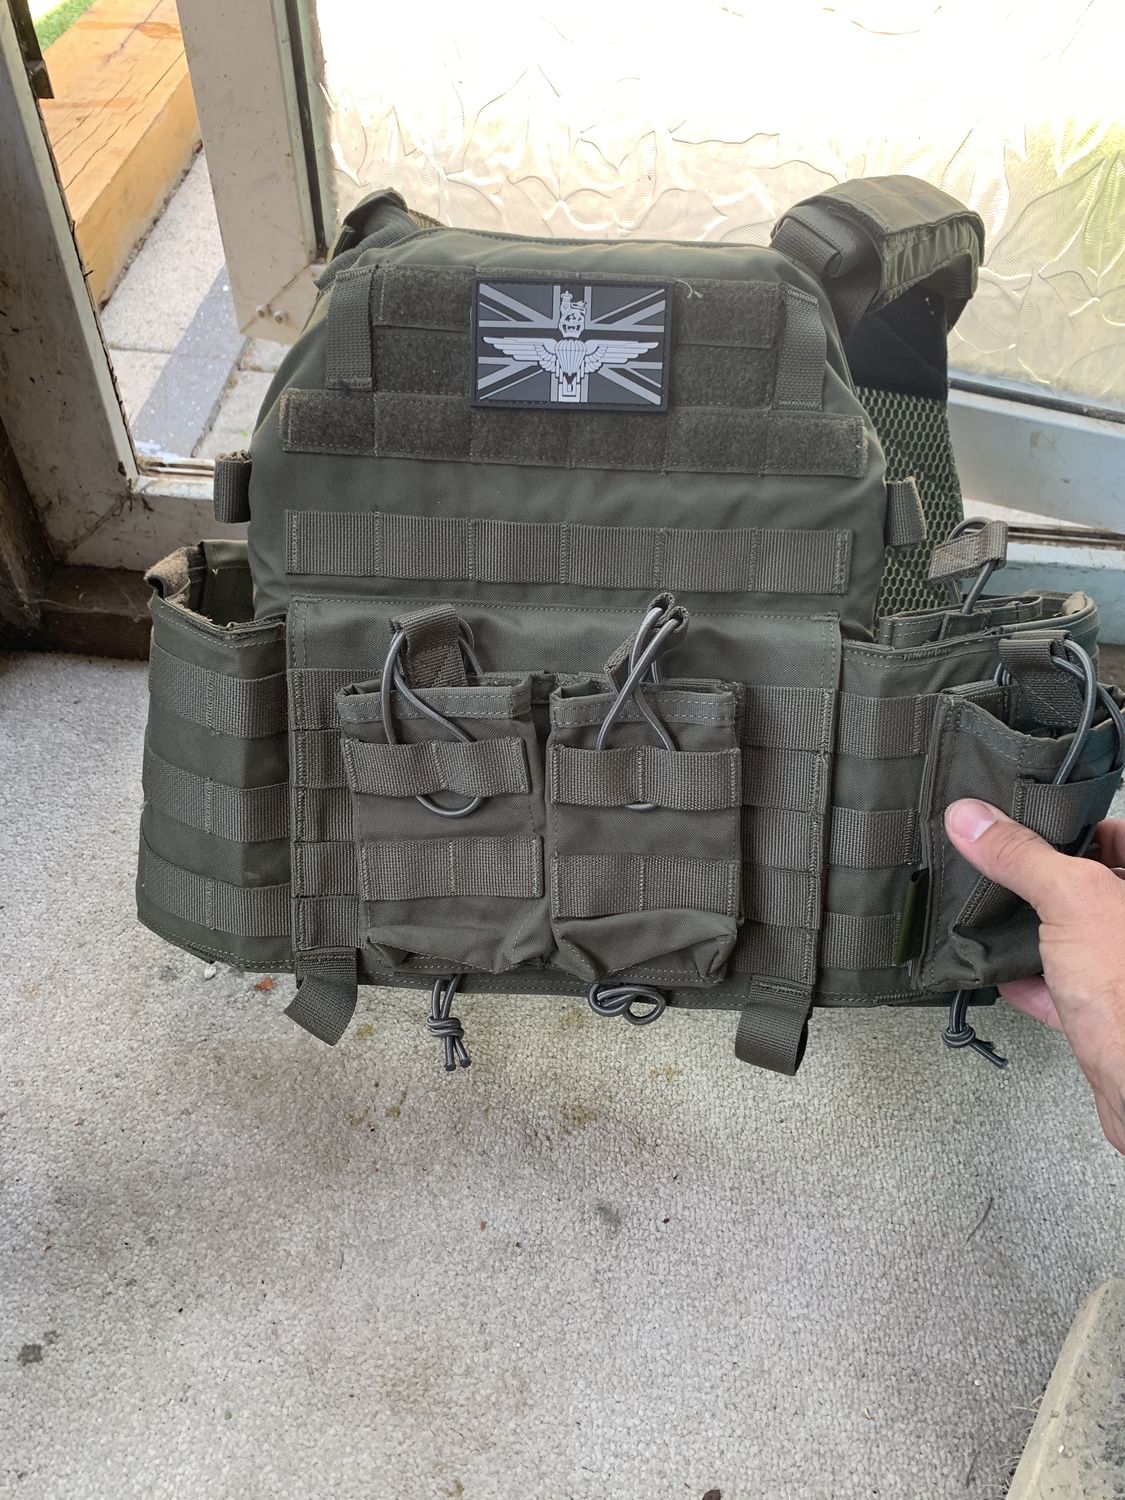 As New Warrior Plate Carrier - Gear - Airsoft Forums UK